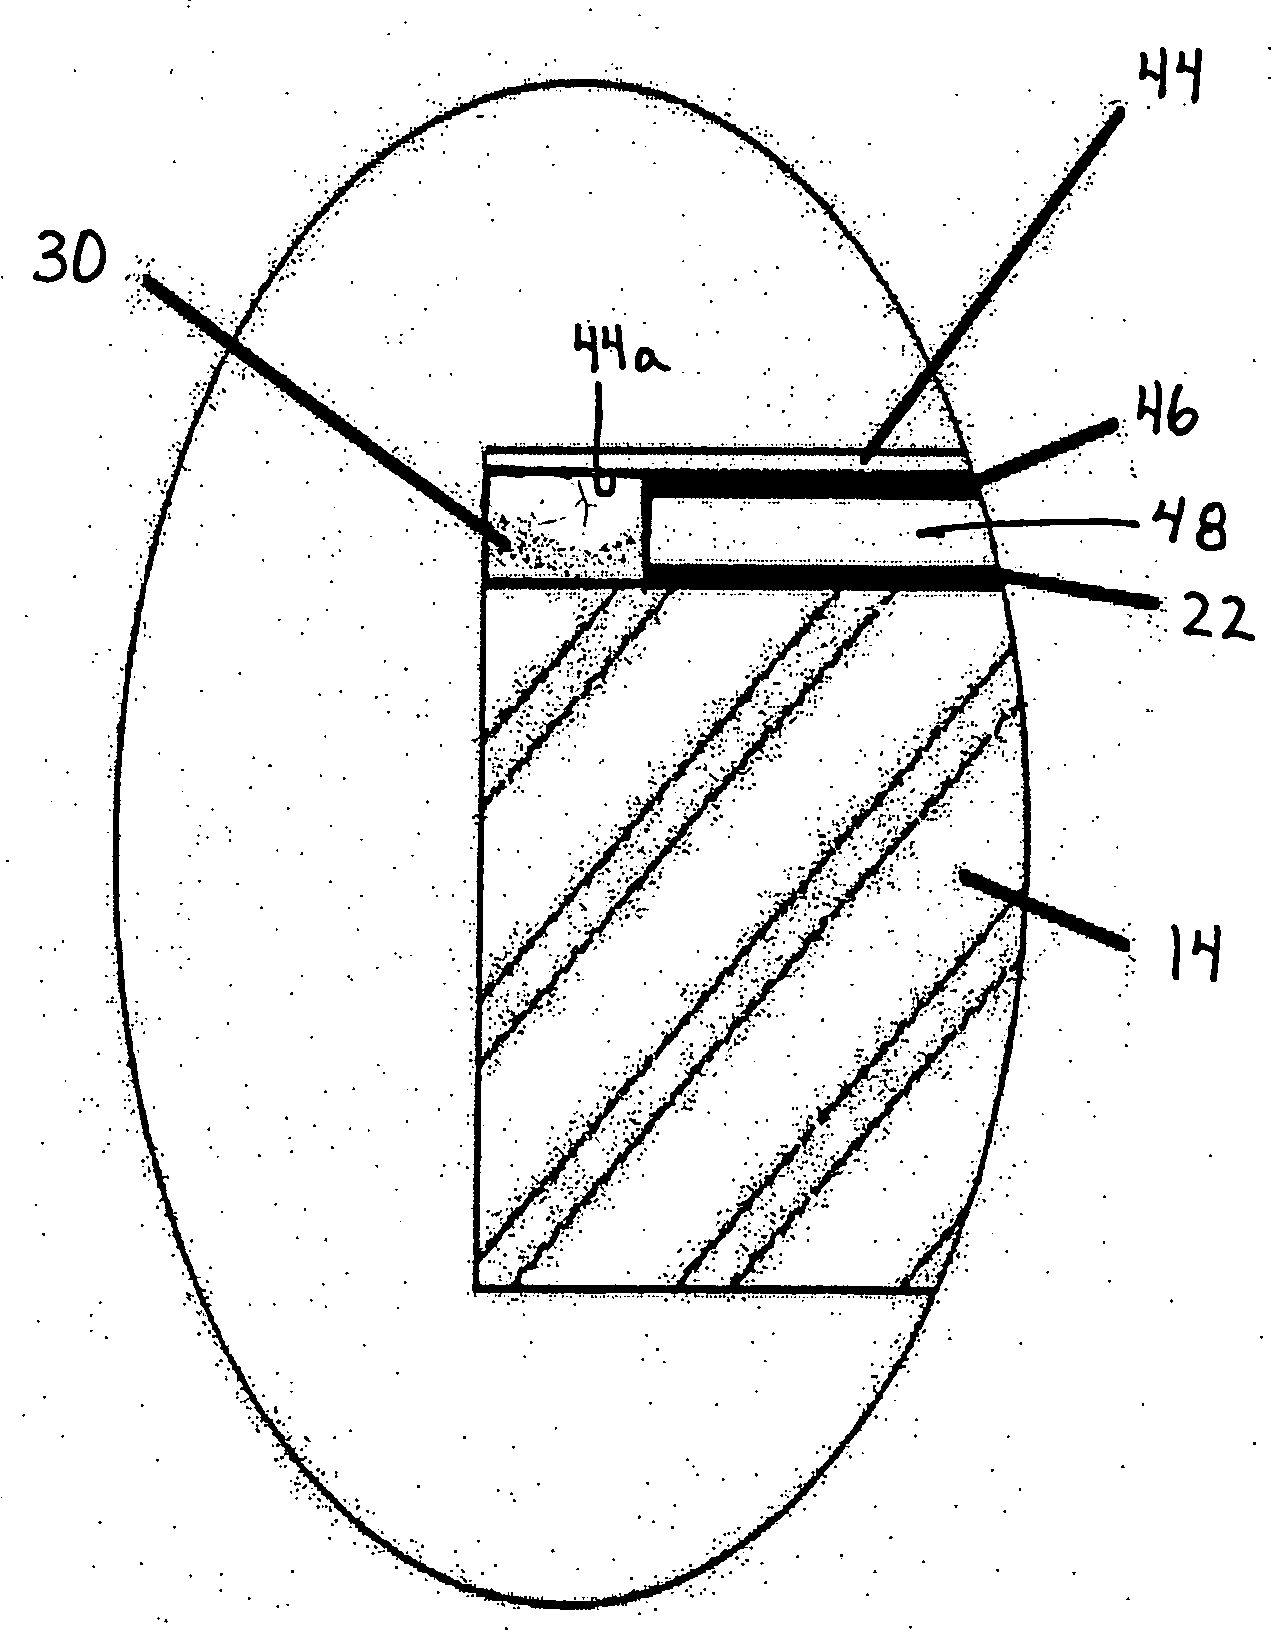 Tensioned touch panel and method of making same